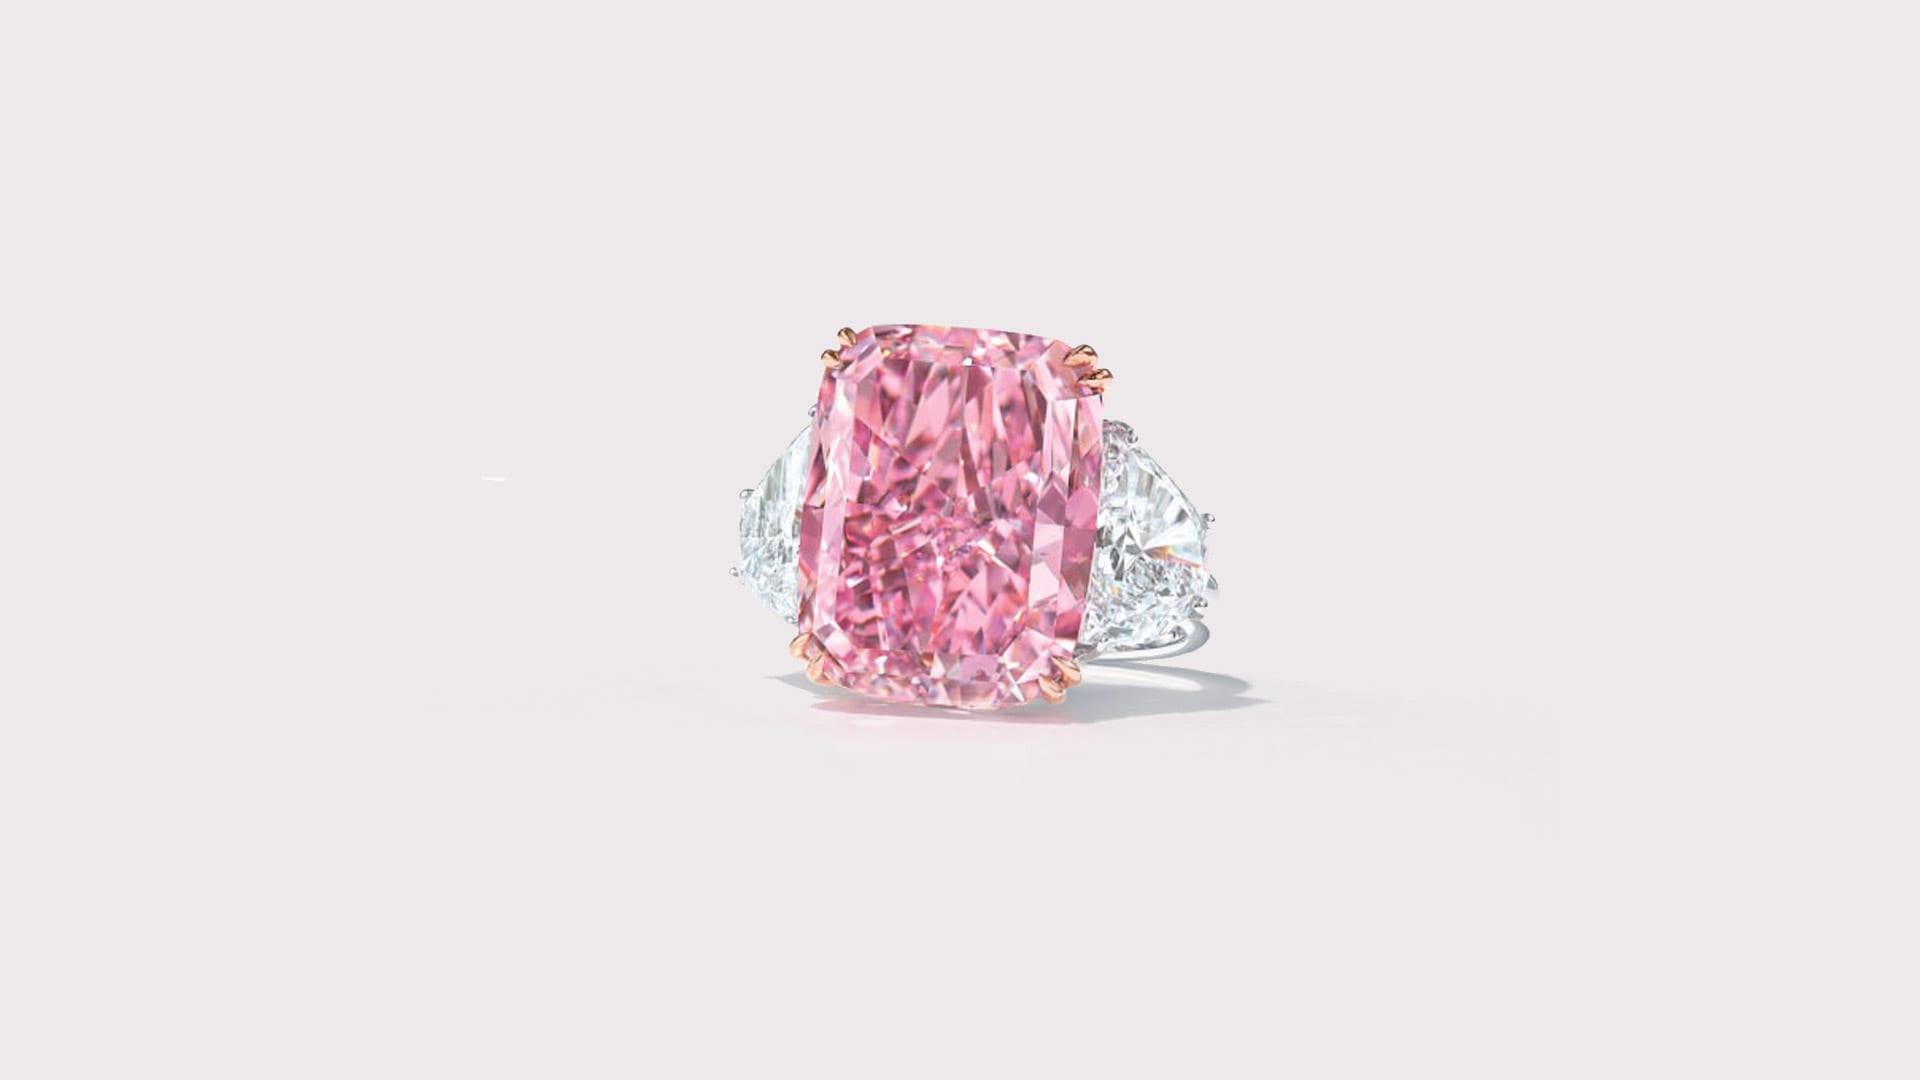 ‘Flawless’ purple-pink diamond fetches record $29.3M at auction